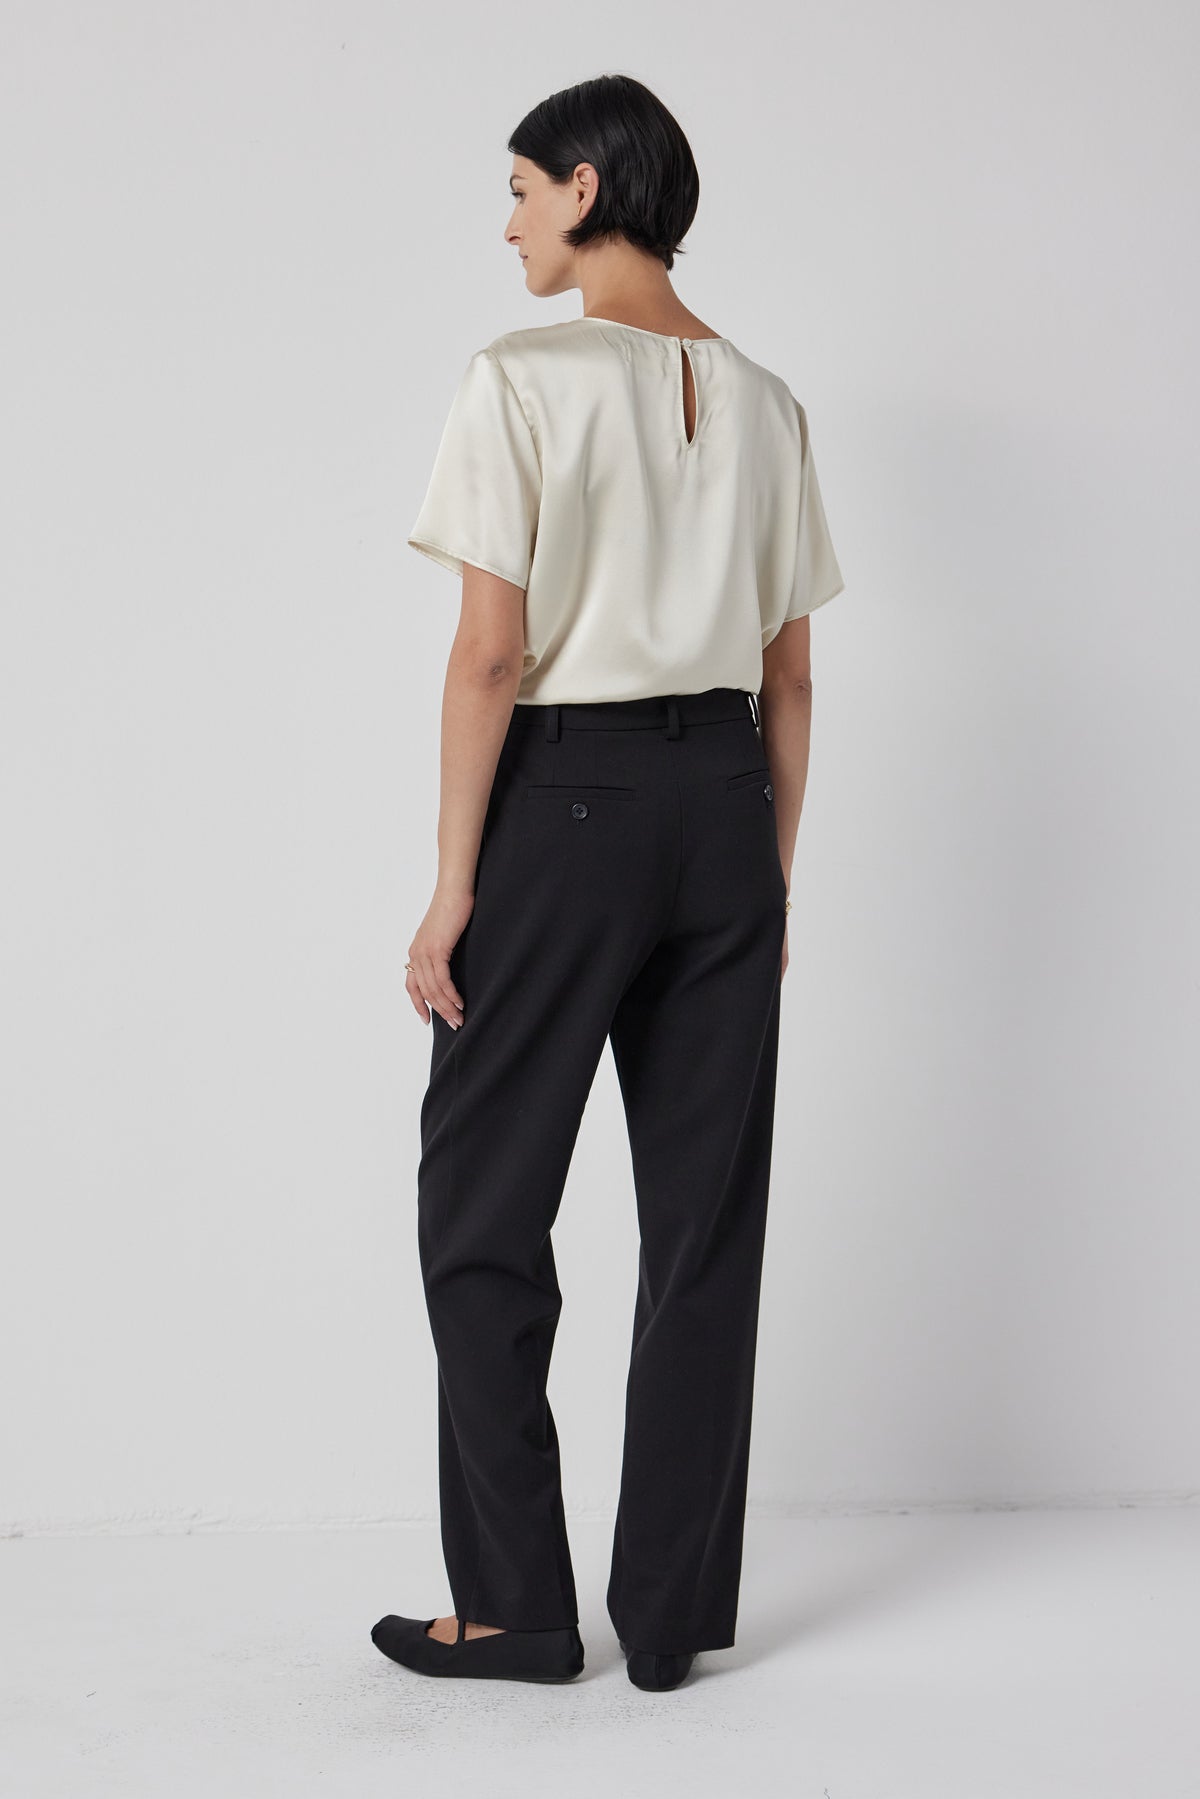 A woman stands facing away from the camera, showcasing the back of a Velvet by Jenny Graham Pasadena top and black trousers, radiating timeless elegance.-36463793995969